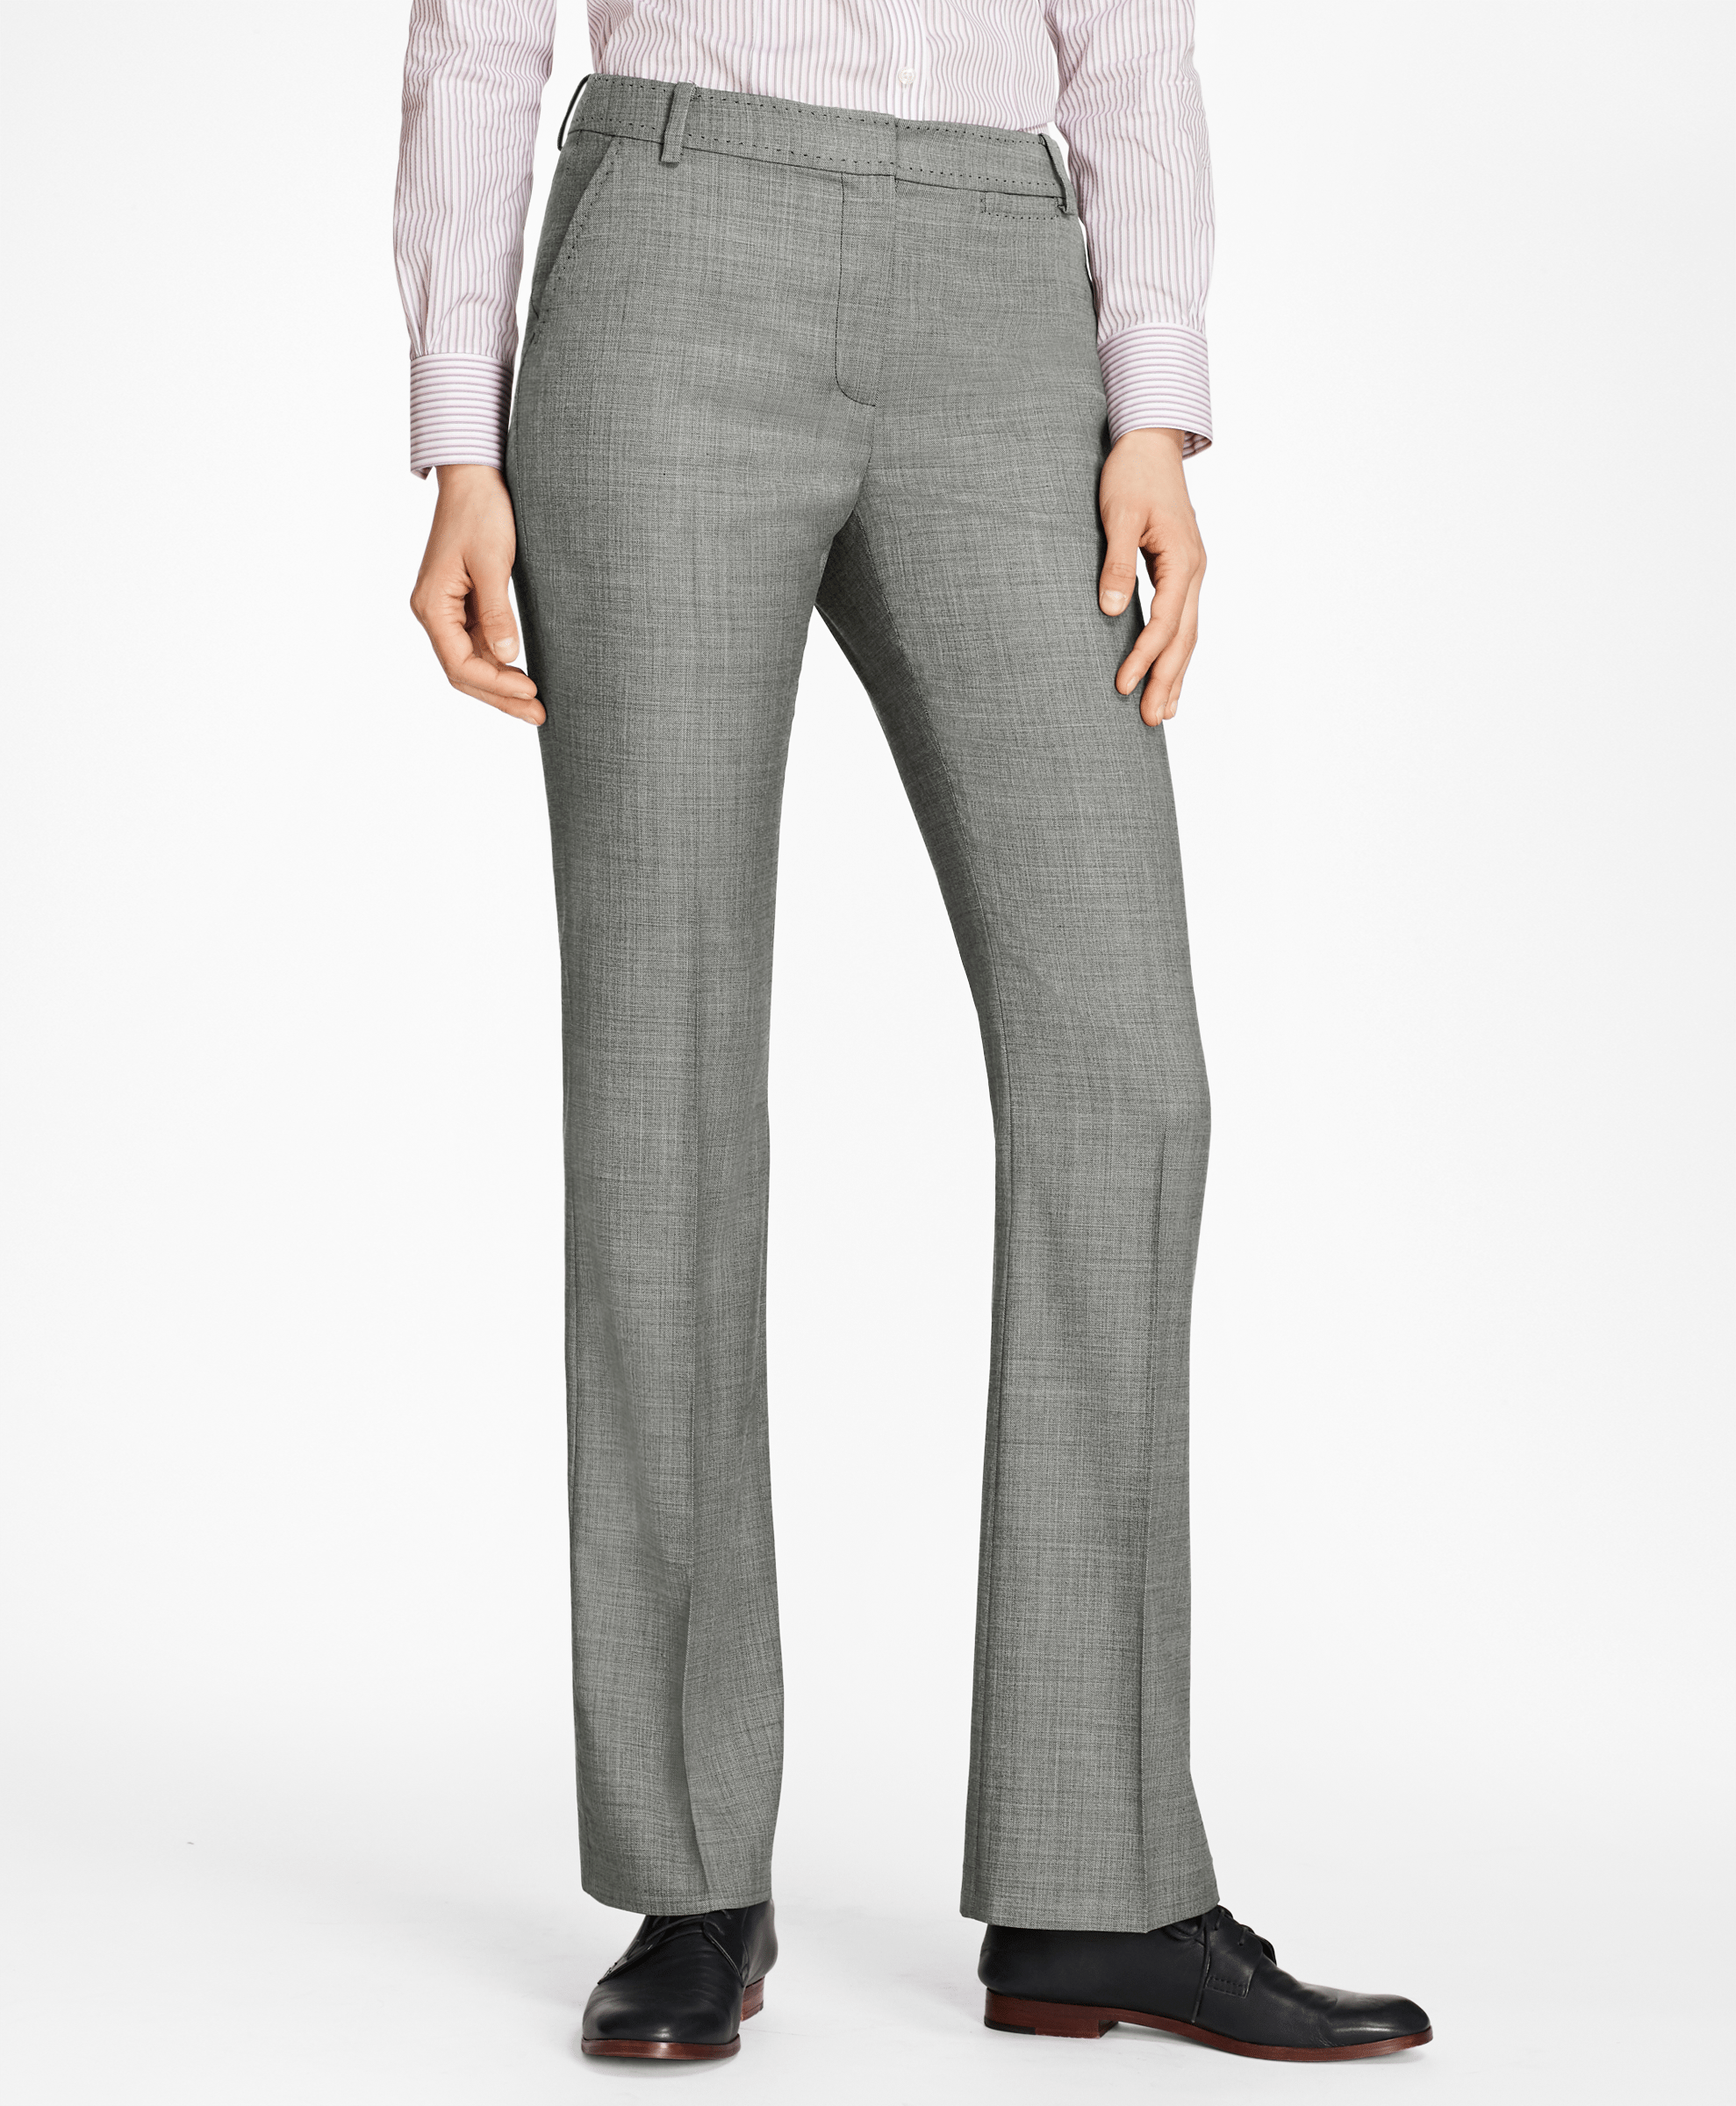 Brooks Brothers Sep Pnt Wv Ea Gry - Womens Dress Trouser